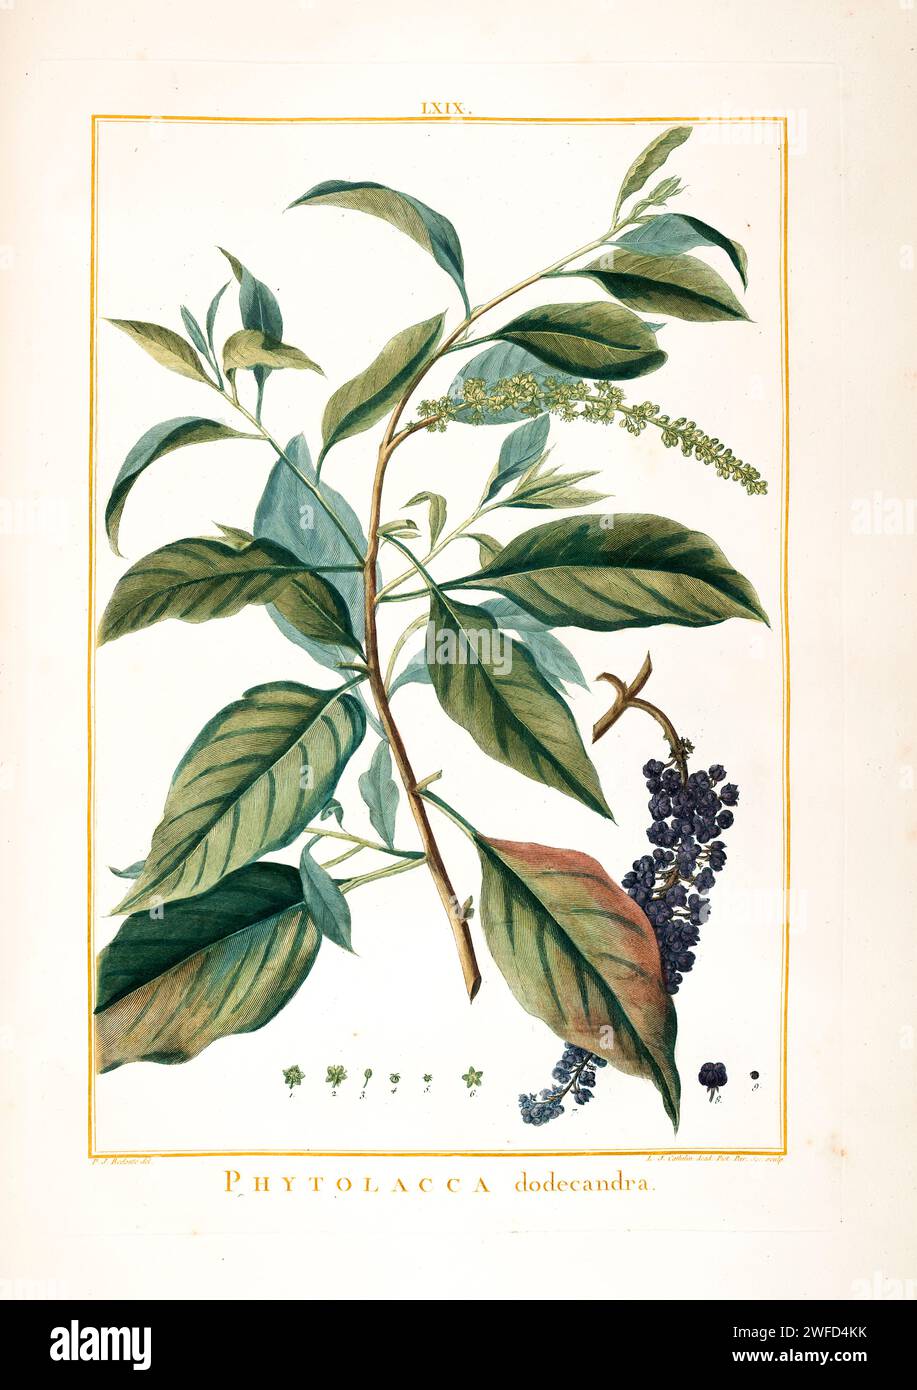 Phytolacca dodecandra Hand Painted by Pierre-Joseph Redouté and published in Stirpes Novae aut Minus Cognitae (1784) by Charles Louis L'Héritier de Brutelle. Phytolacca dodecandra, commonly known as endod, gopo berry, or African soapberry, is a trailing shrub or climber native to Tropical Africa, Southern Africa, and Madagascar. It is dioecious, with male and female flowers on separate plants. Morphologically, it is highly variable. Stock Photo